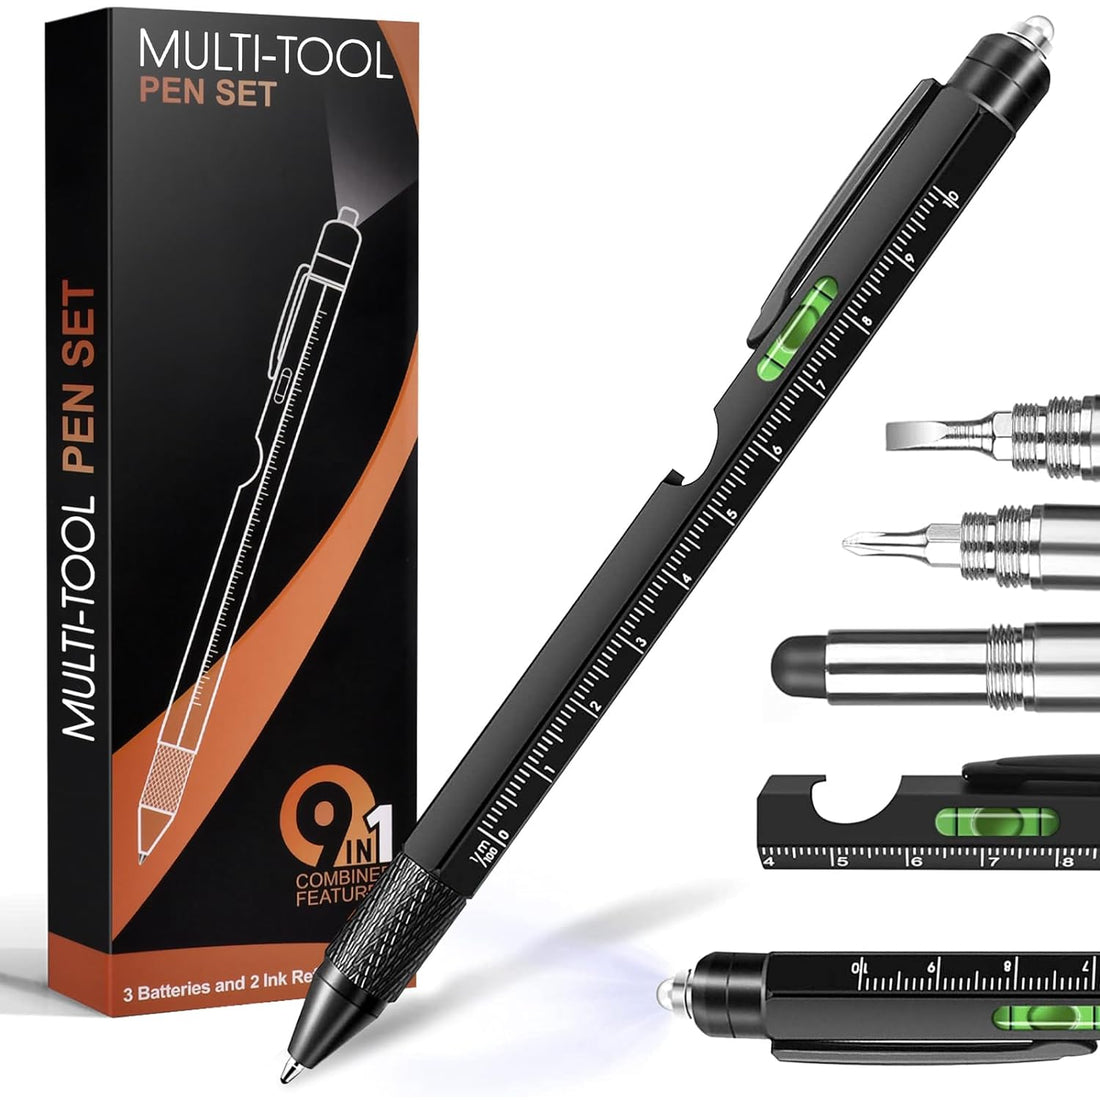 Gifts for Men, Dad Gifts from Daughter Son, Stocking Stuffers for Adults, 9 in 1 Multitool Pen, Cool Tools Gadgets for Men, Mens Gifts for Christmas, Valentines Day Gifts for Him Boyfriend Husband